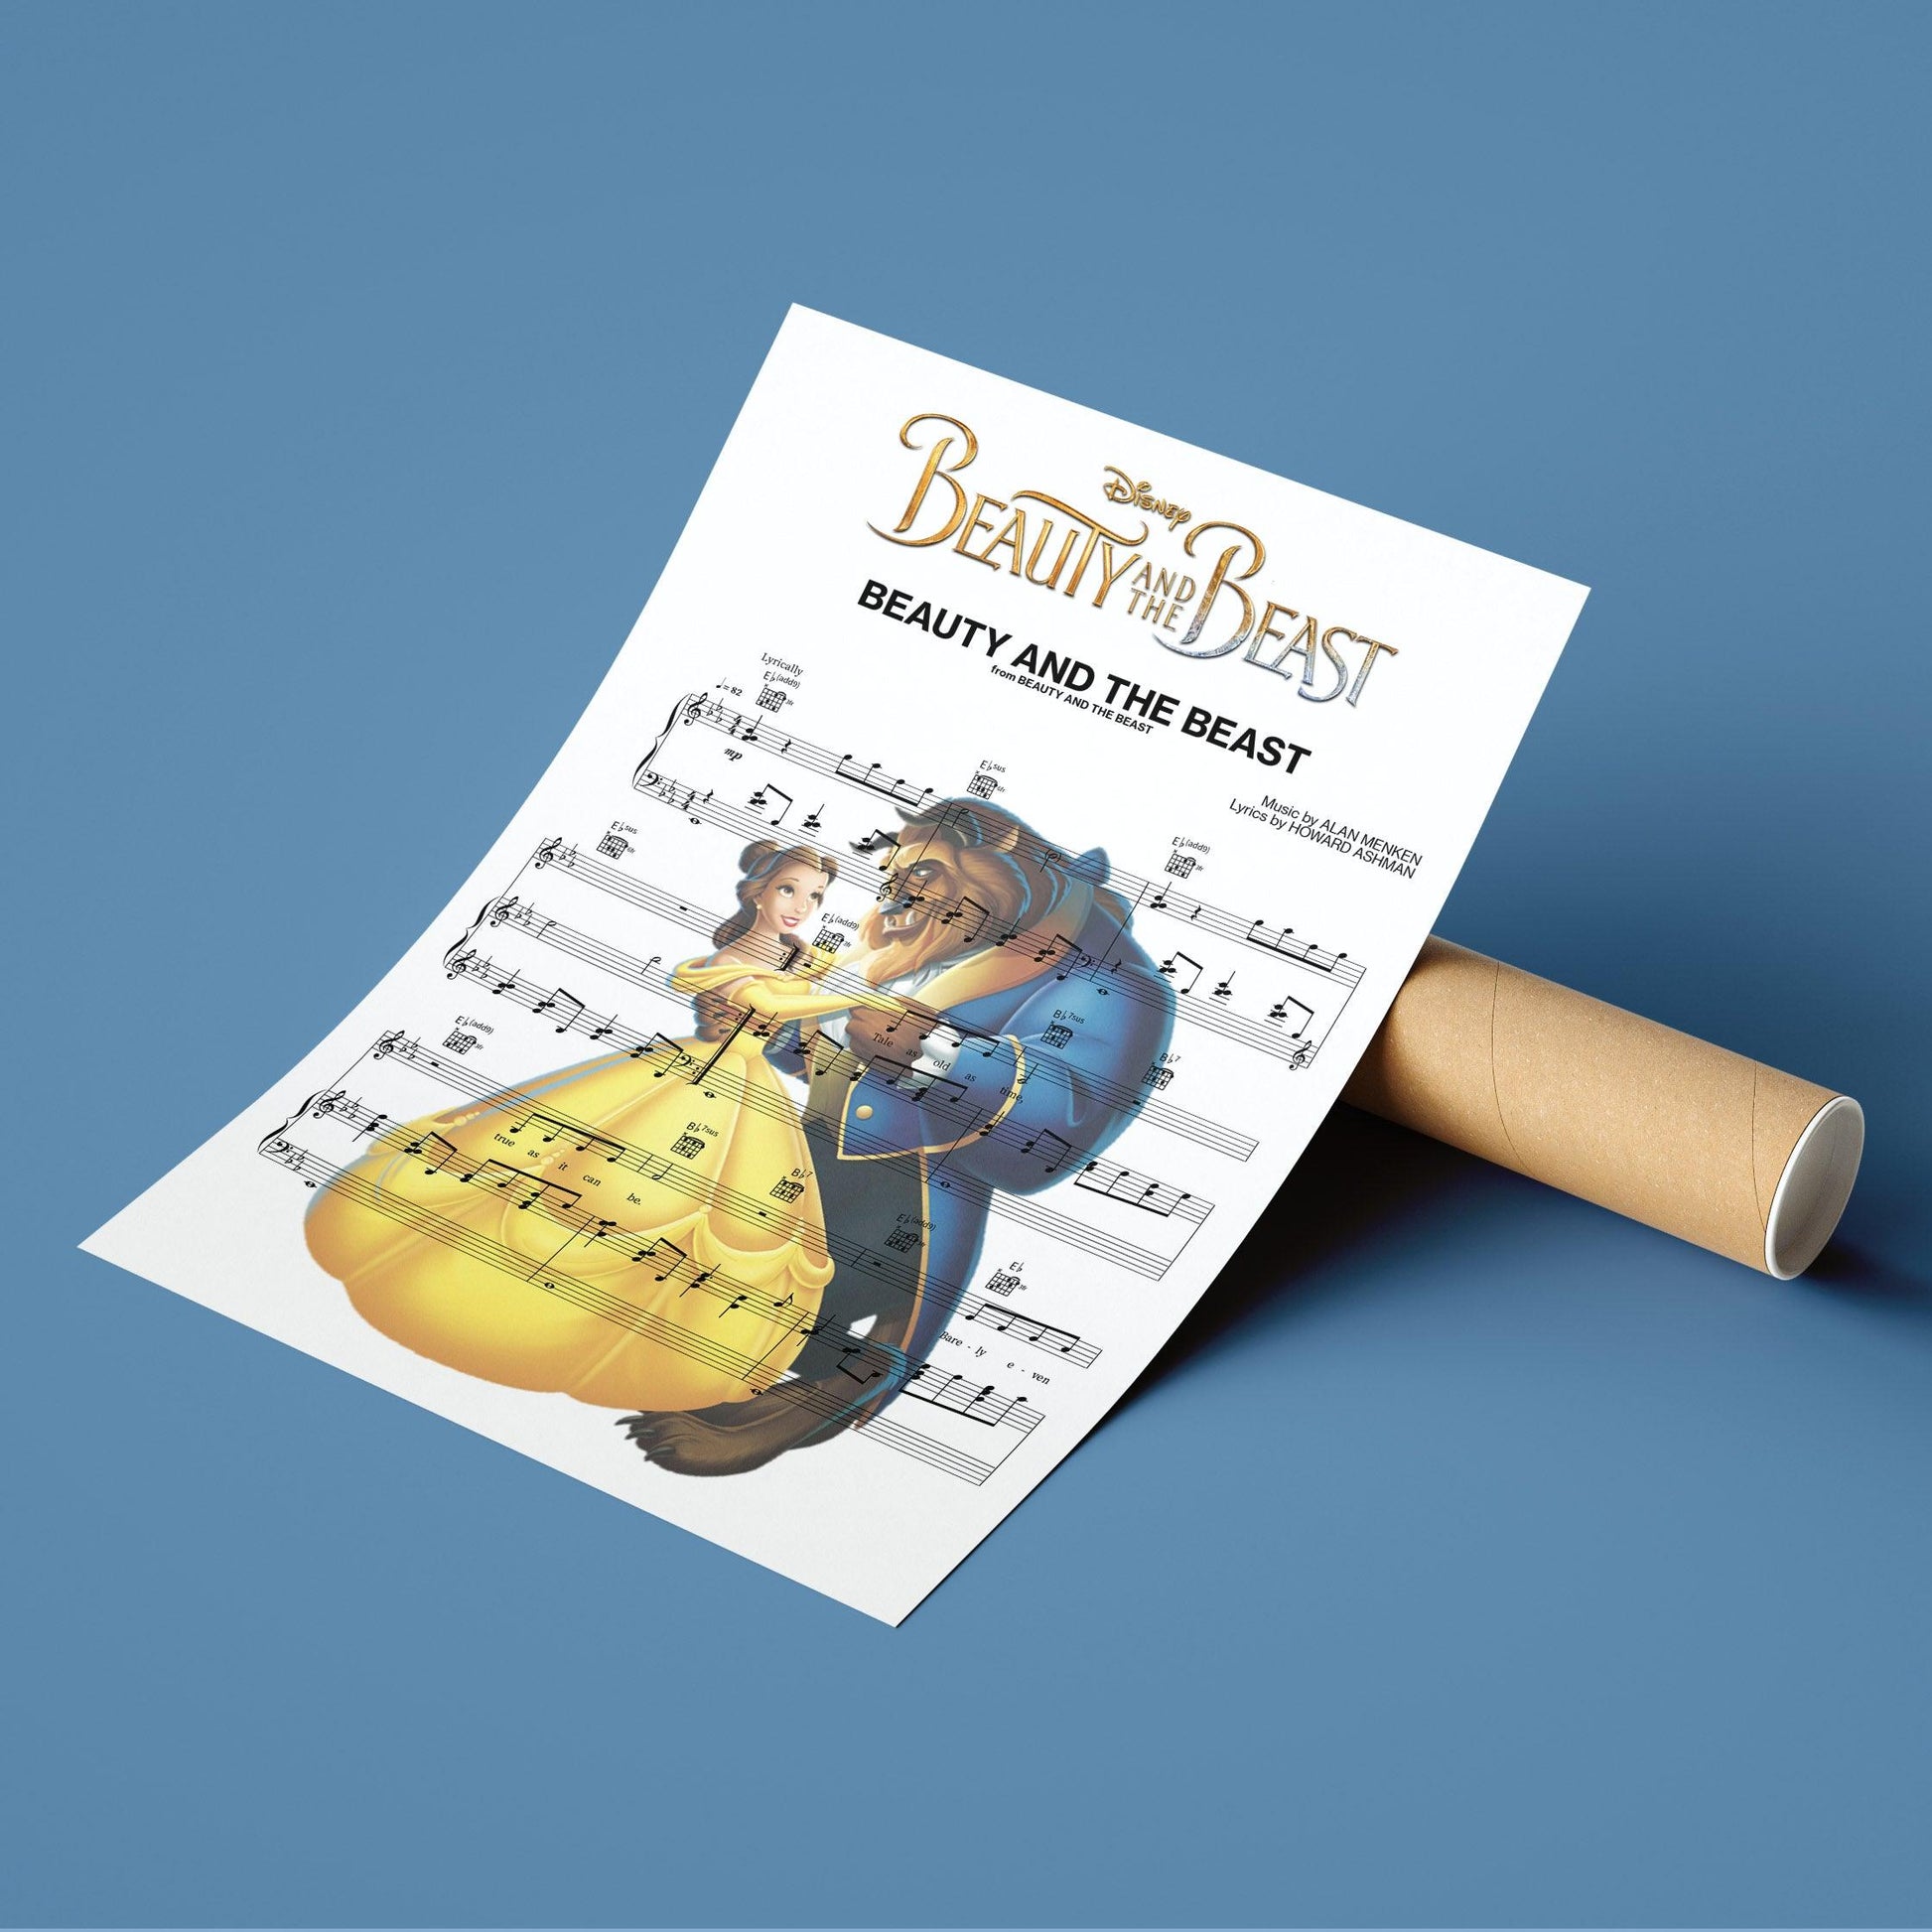 Beauty and the Beast - Theme Song Print | Sheet Music Wall Art | Song Music Sheet Notes Print Everyone has a favorite song and now you can show the score as printed staff. The personal favorite song sheet print shows the song chosen as the score. 